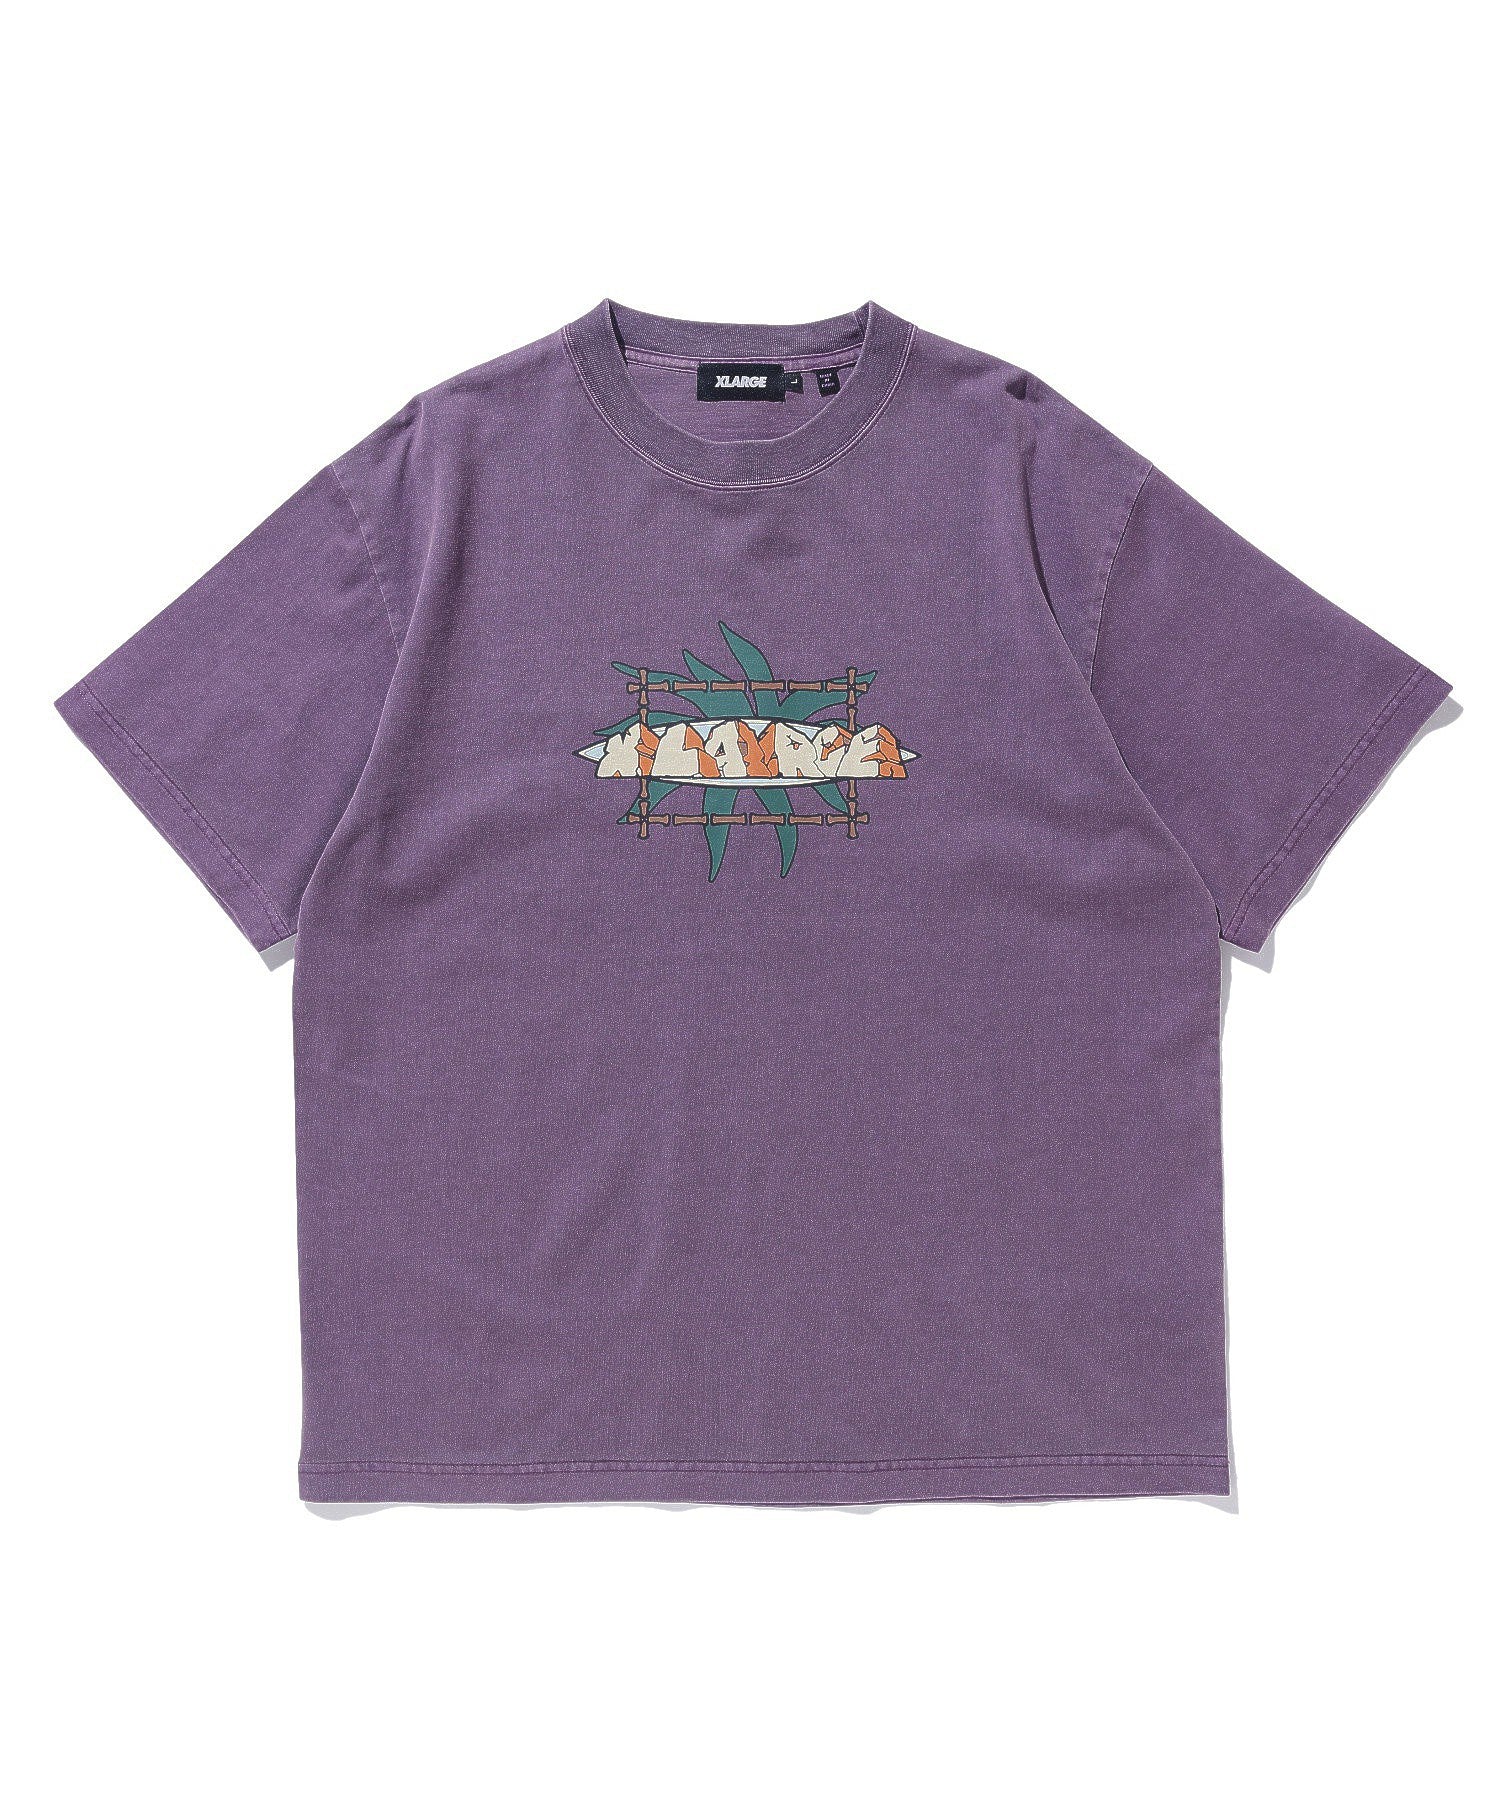 PIGMENT DYED STONE MONUMENT S/S TEE